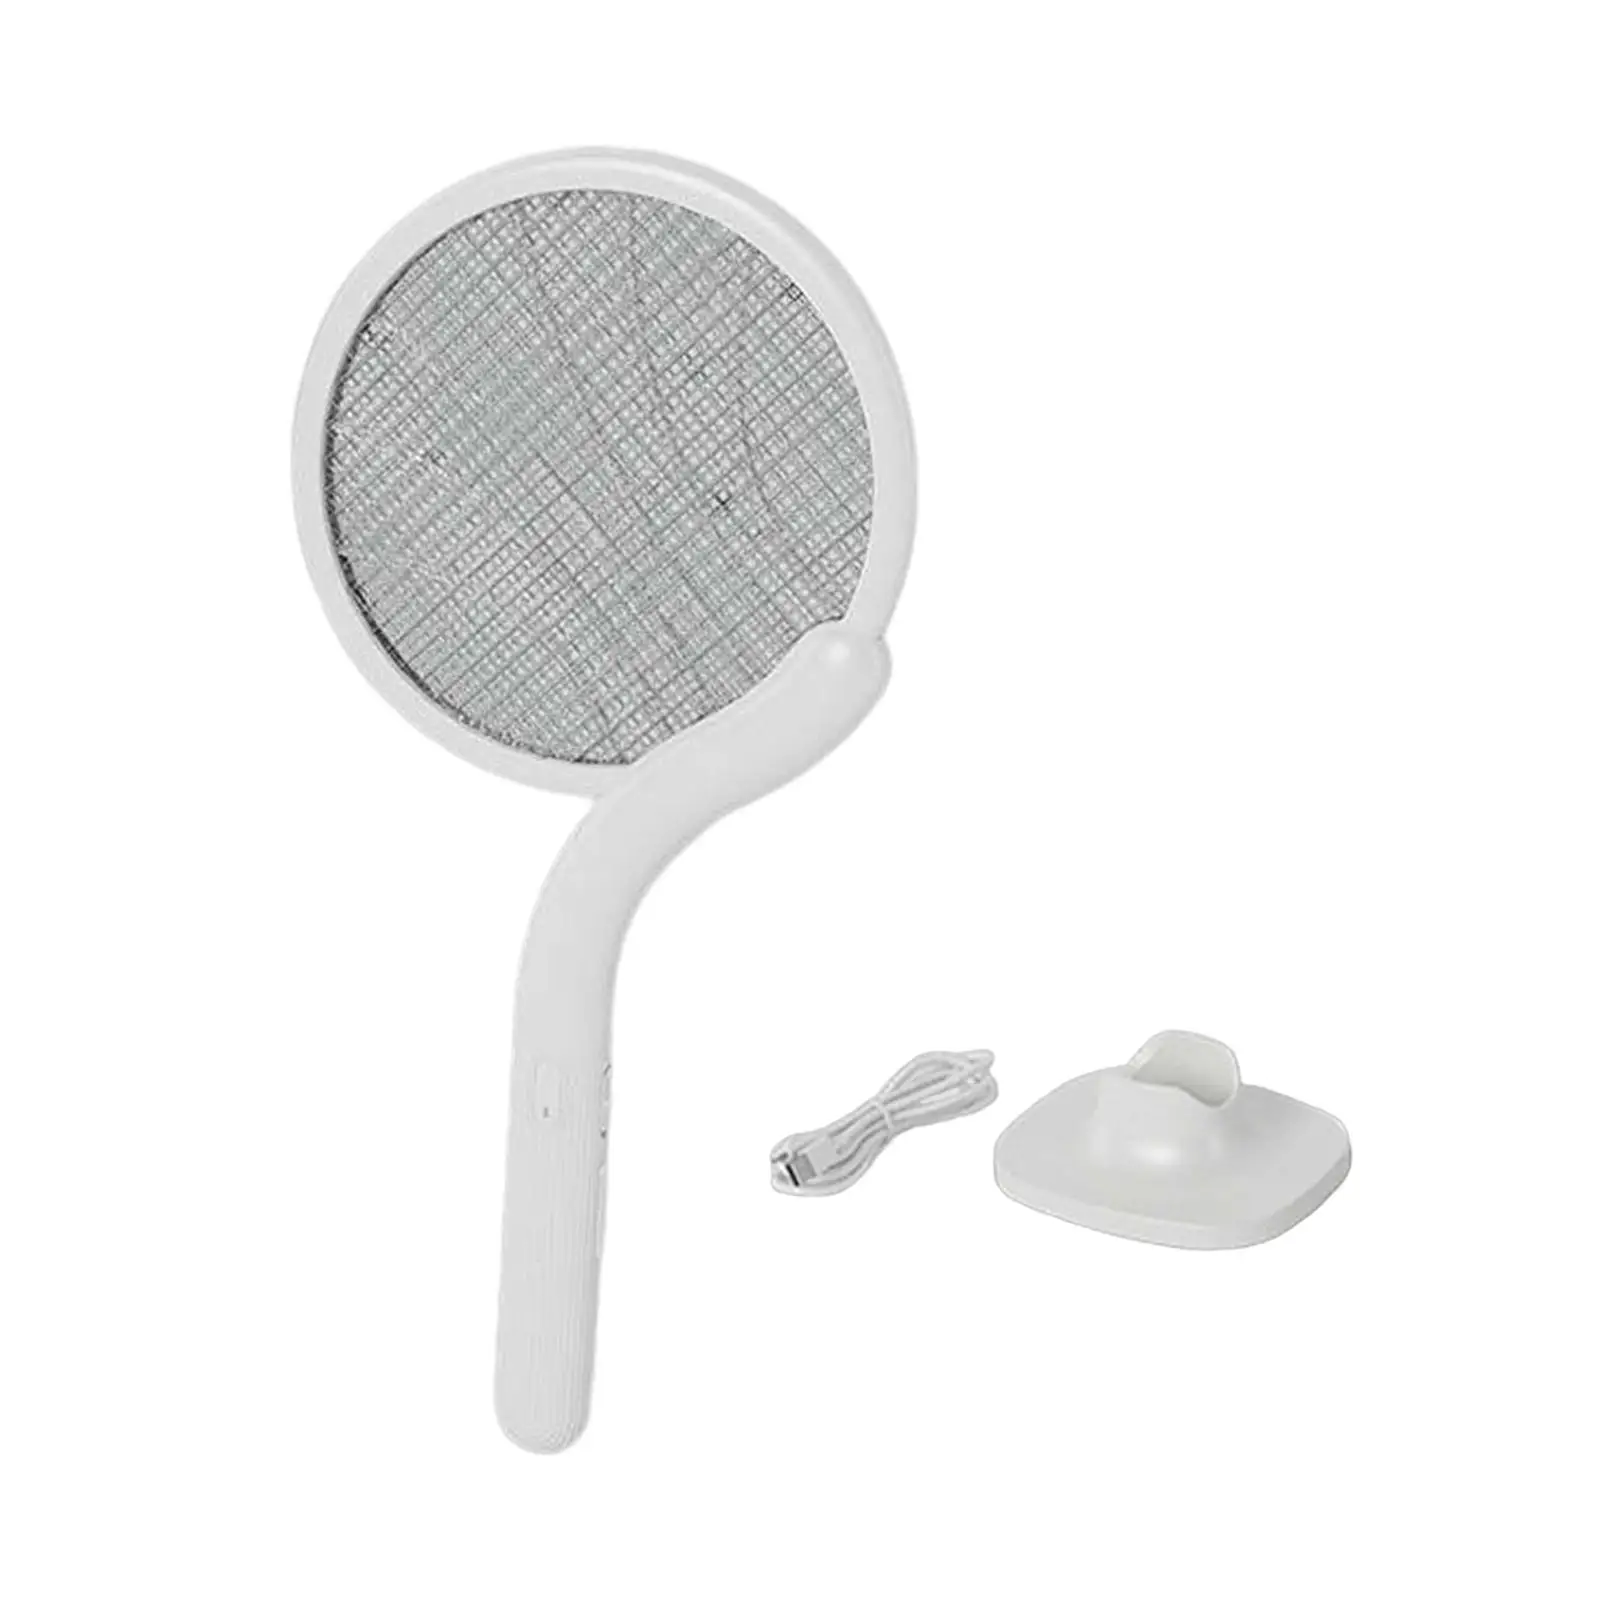 Electric Fly Swatter Racket Standing & Handheld High Powered USB Rechargeable Fly Killer for Office Kitchen Home Camping Patio